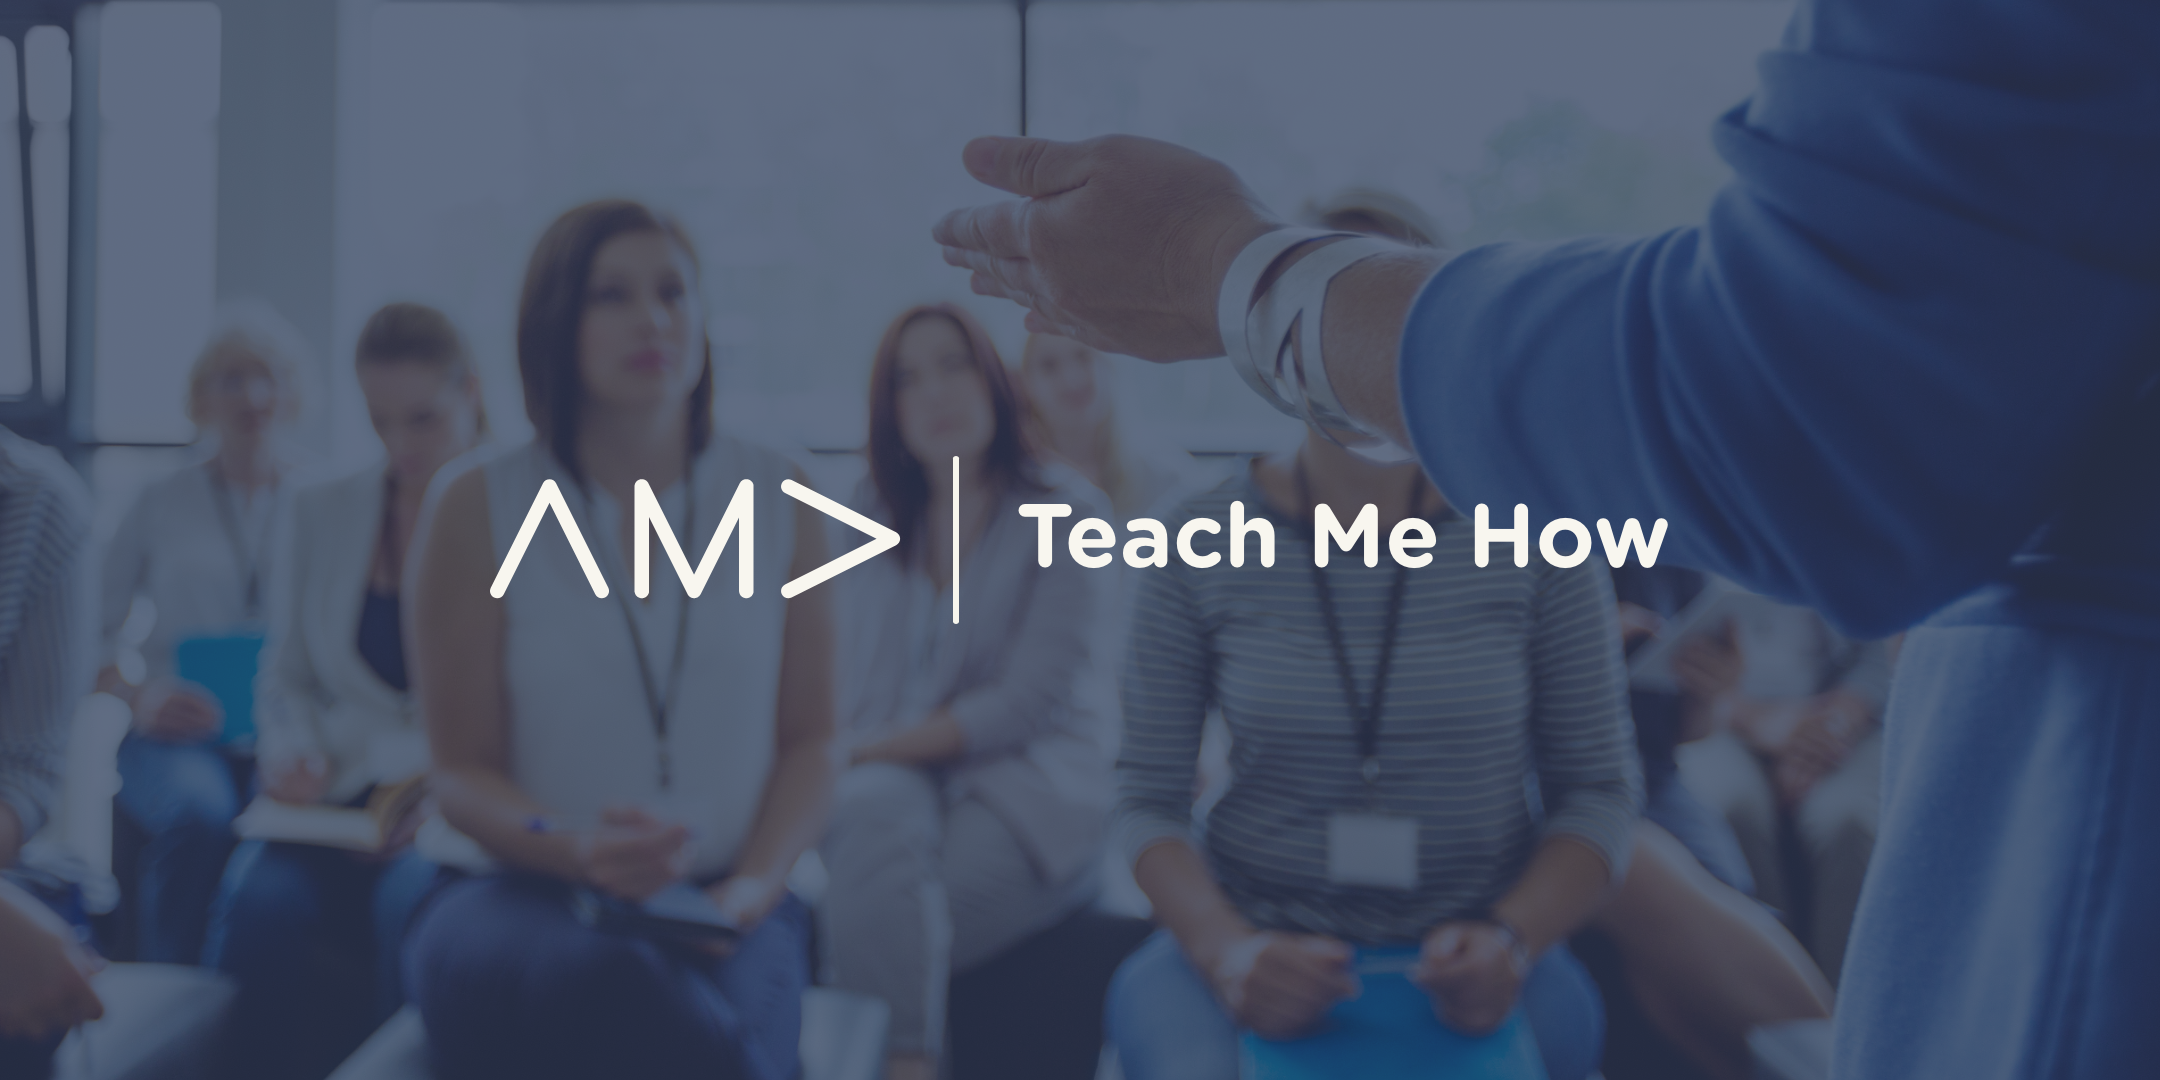 Teach Me How: The Art of Building Relationships to Advance Your Career